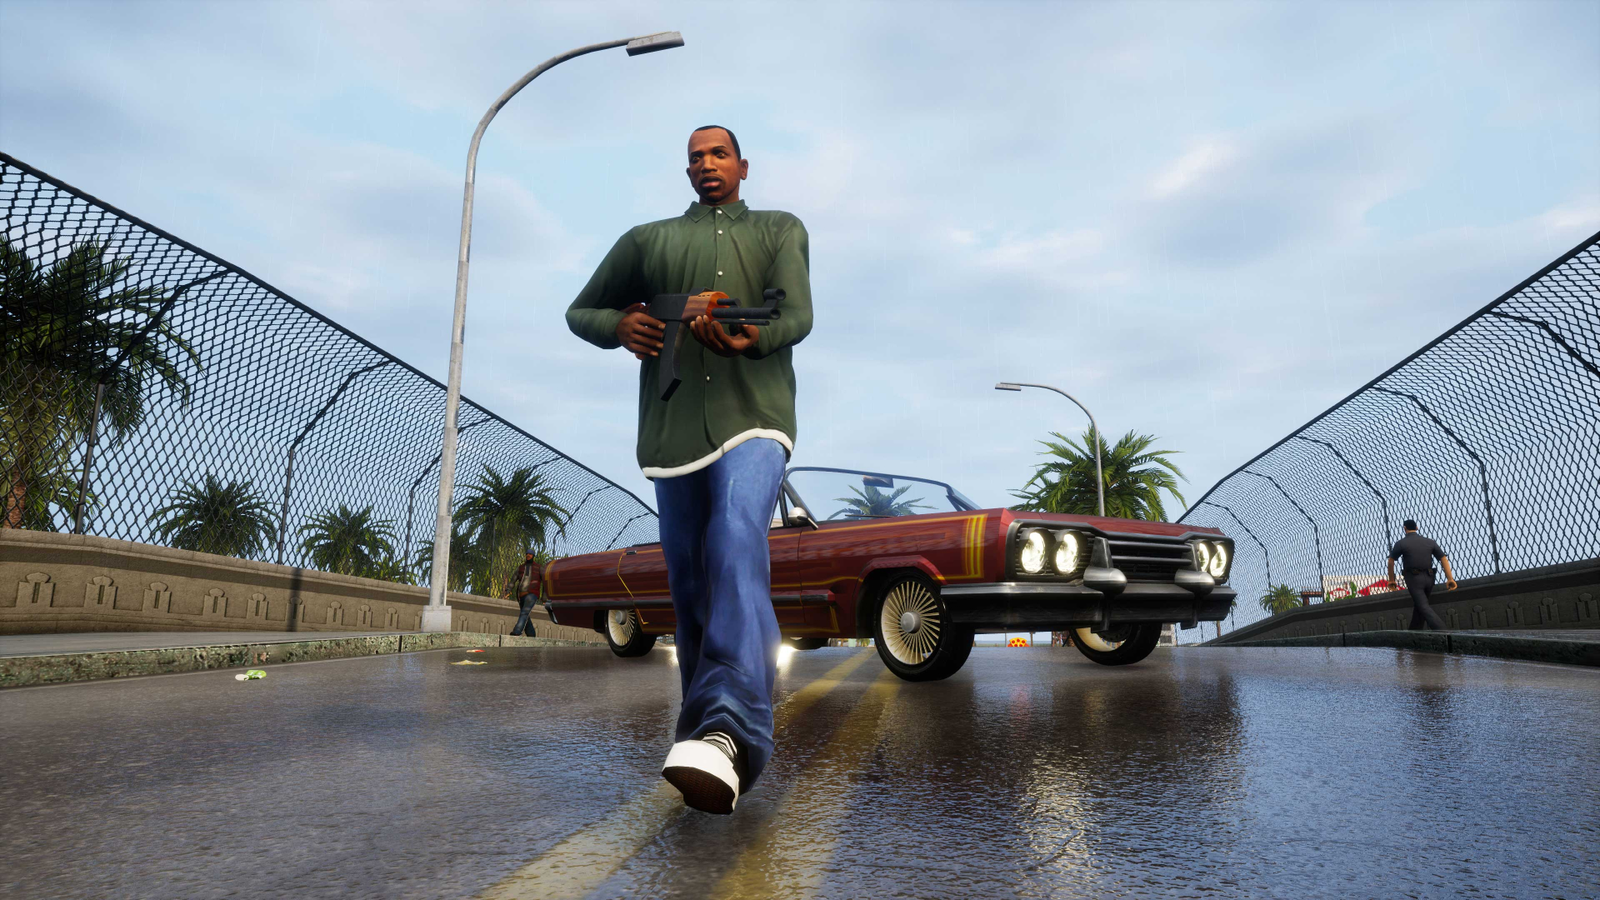 GTA Trilogy returns to Steam with Definitive Edition PC release